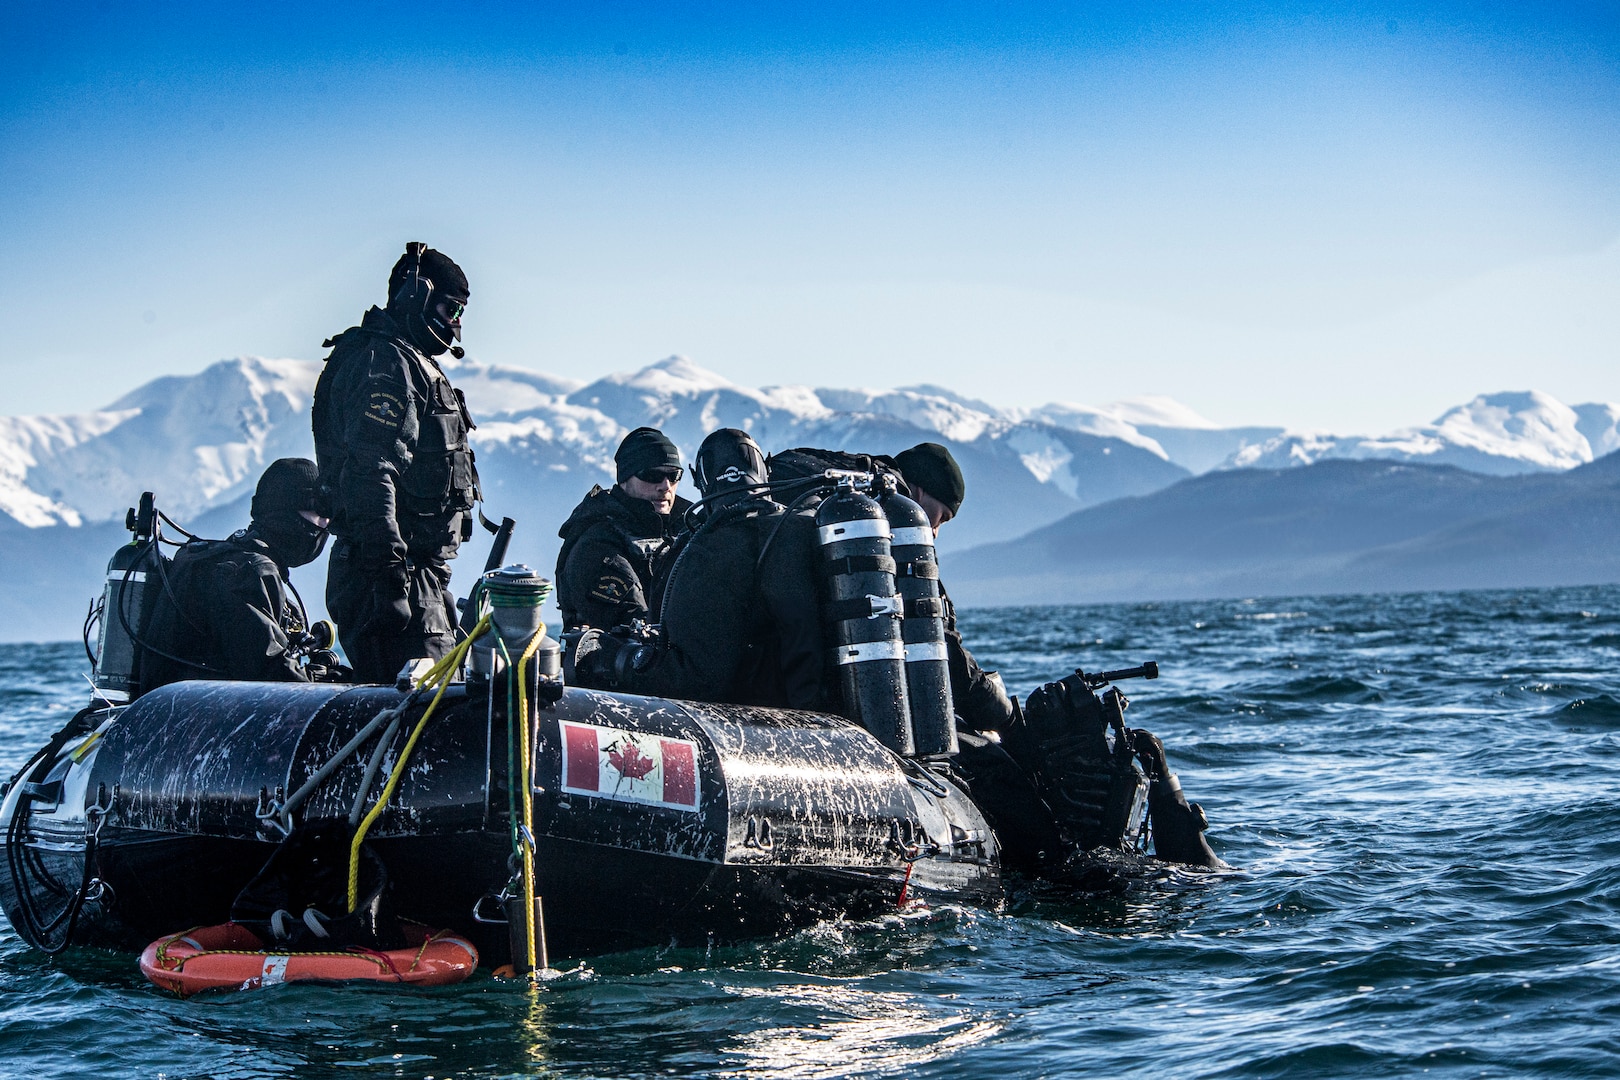 Clearance Divers from Fleet Diving Unit-Pacific and port inspection divers from the Royal Canadian Navy conduct mine countermeasure missions near Juneau, Alaska, during Exercise ARCTIC EDGE 2022, March 8, 2022. AE22 is the largest joint exercise in Alaska, with approximately 1,000 U.S. military personnel training alongside members of the Canadian Armed Forces to demonstrate capabilities in austere cold weather conditions. (Master Sailor Dan Bard, Canadian Forces Combat Camera, Canadian Armed Forces)